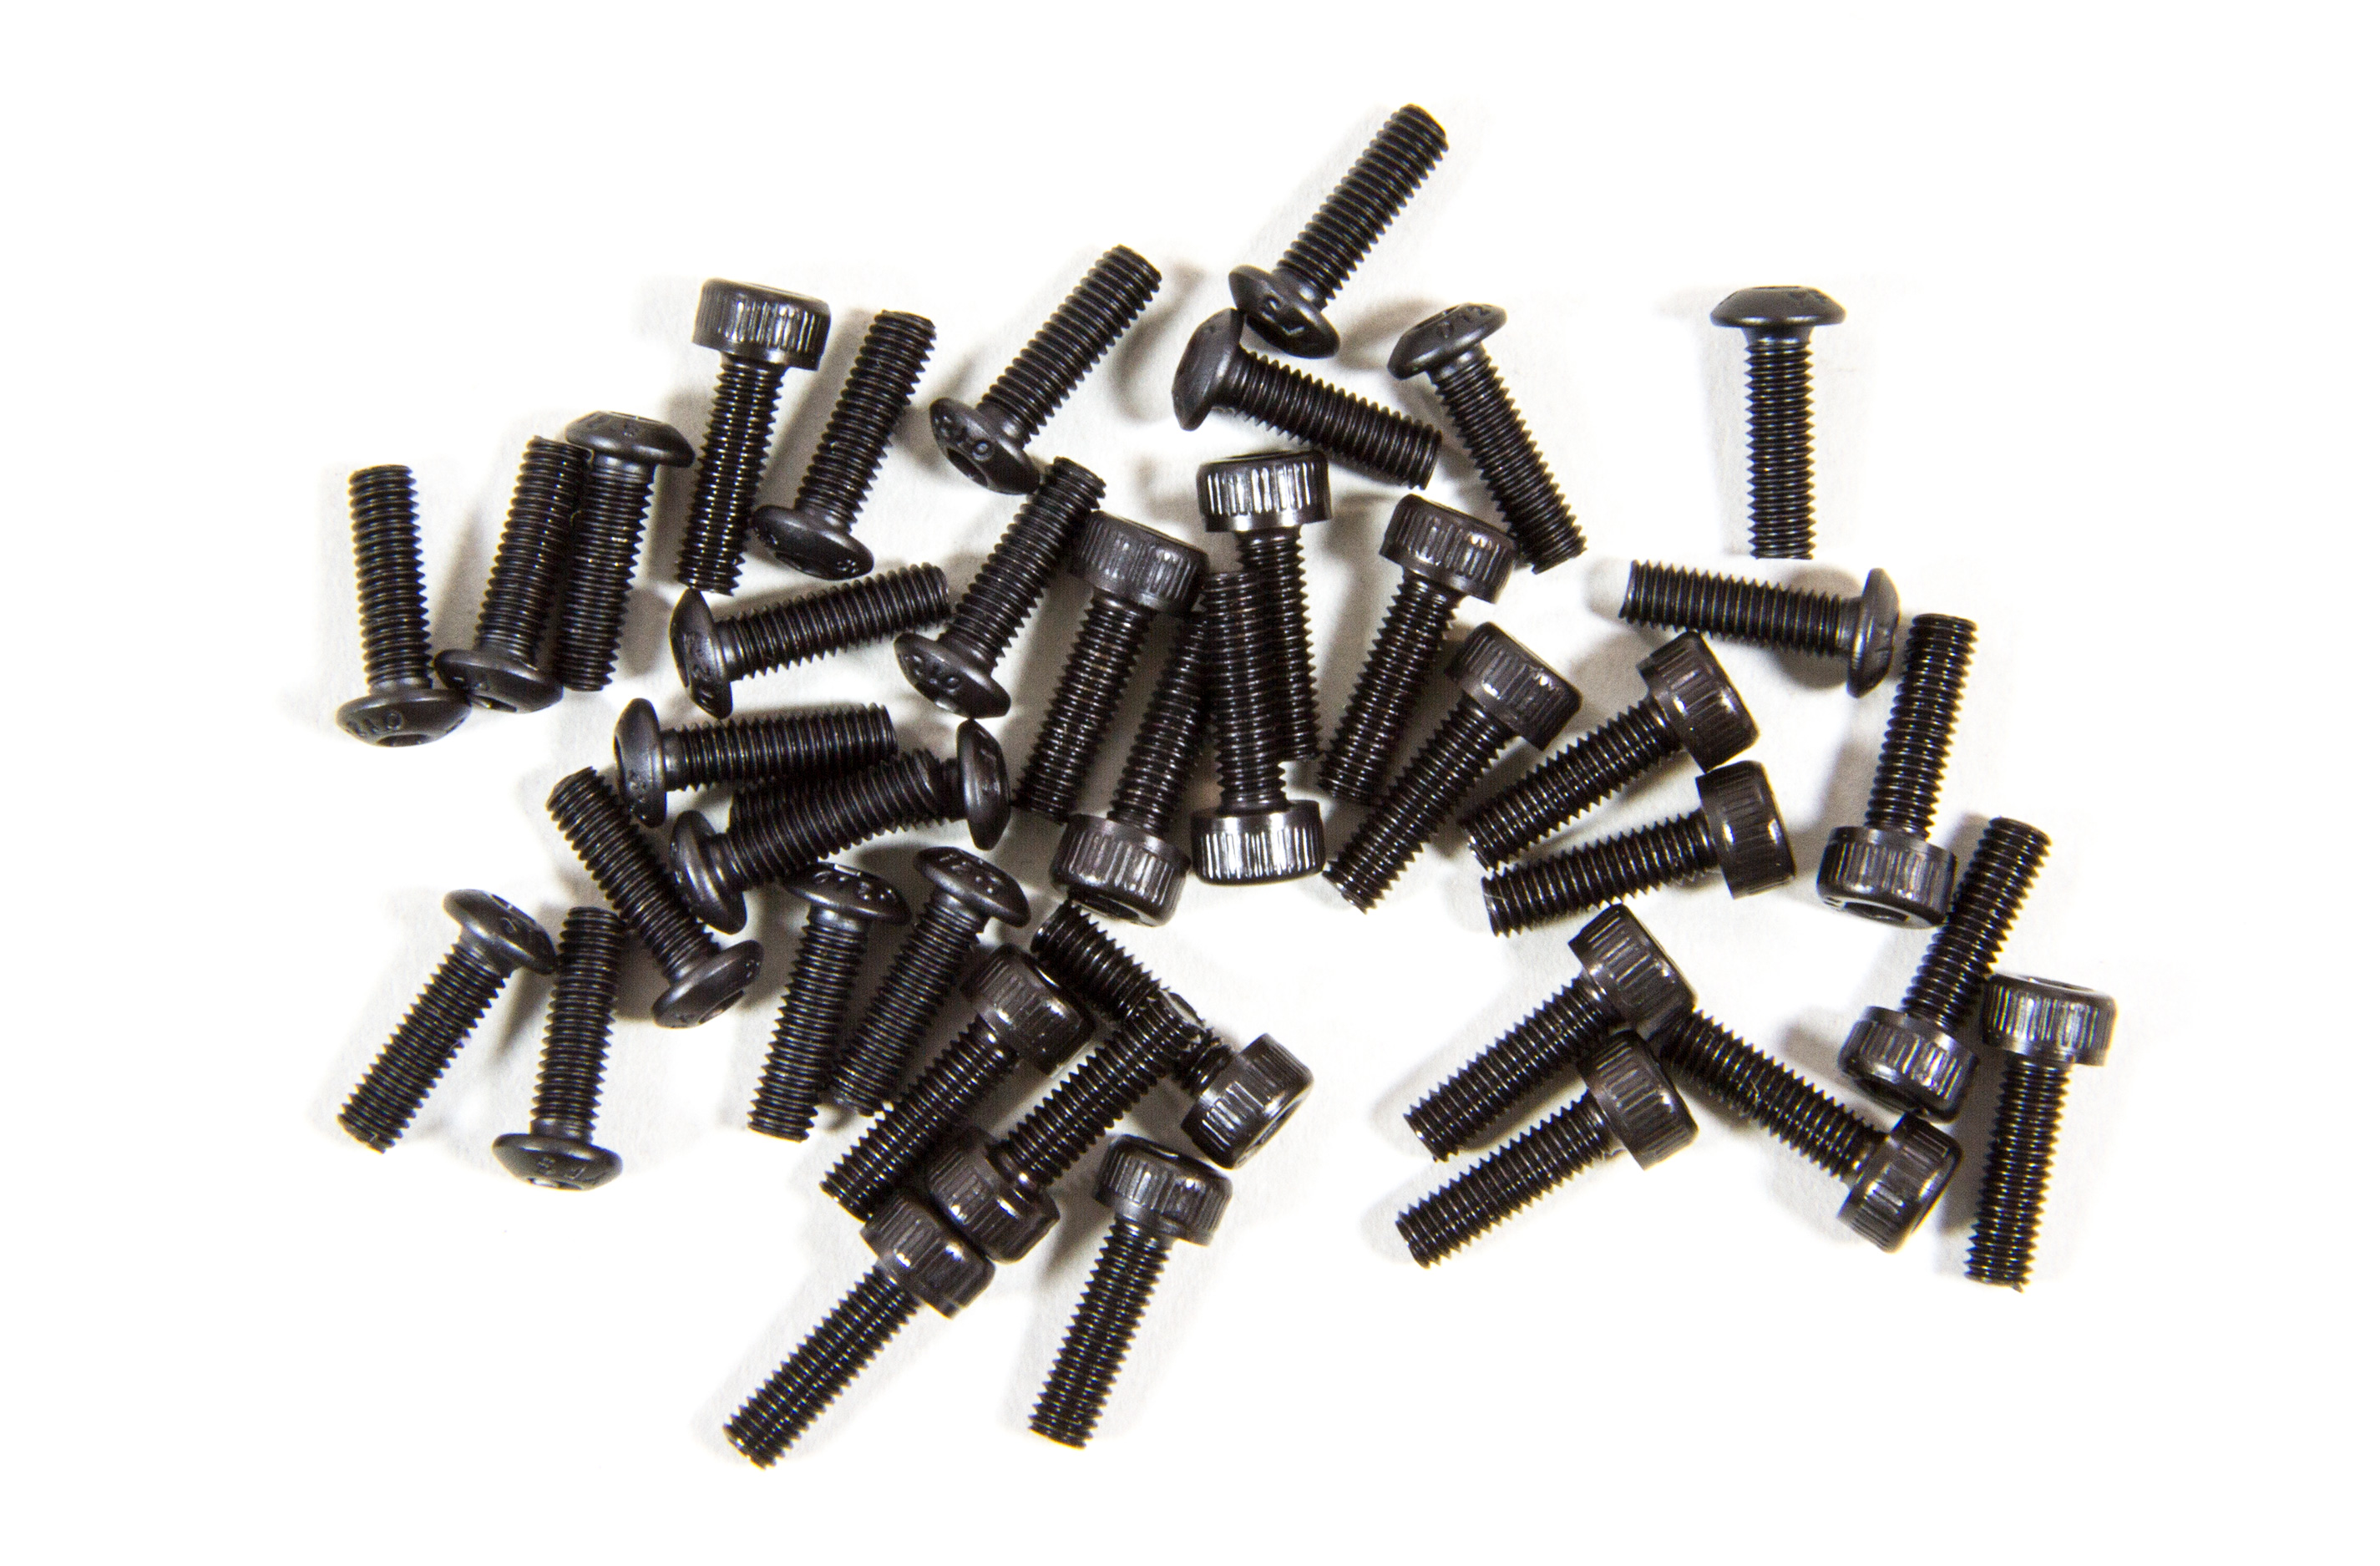 LOSB 6450 Wheel Screw Set, for 5ive-T and Mini